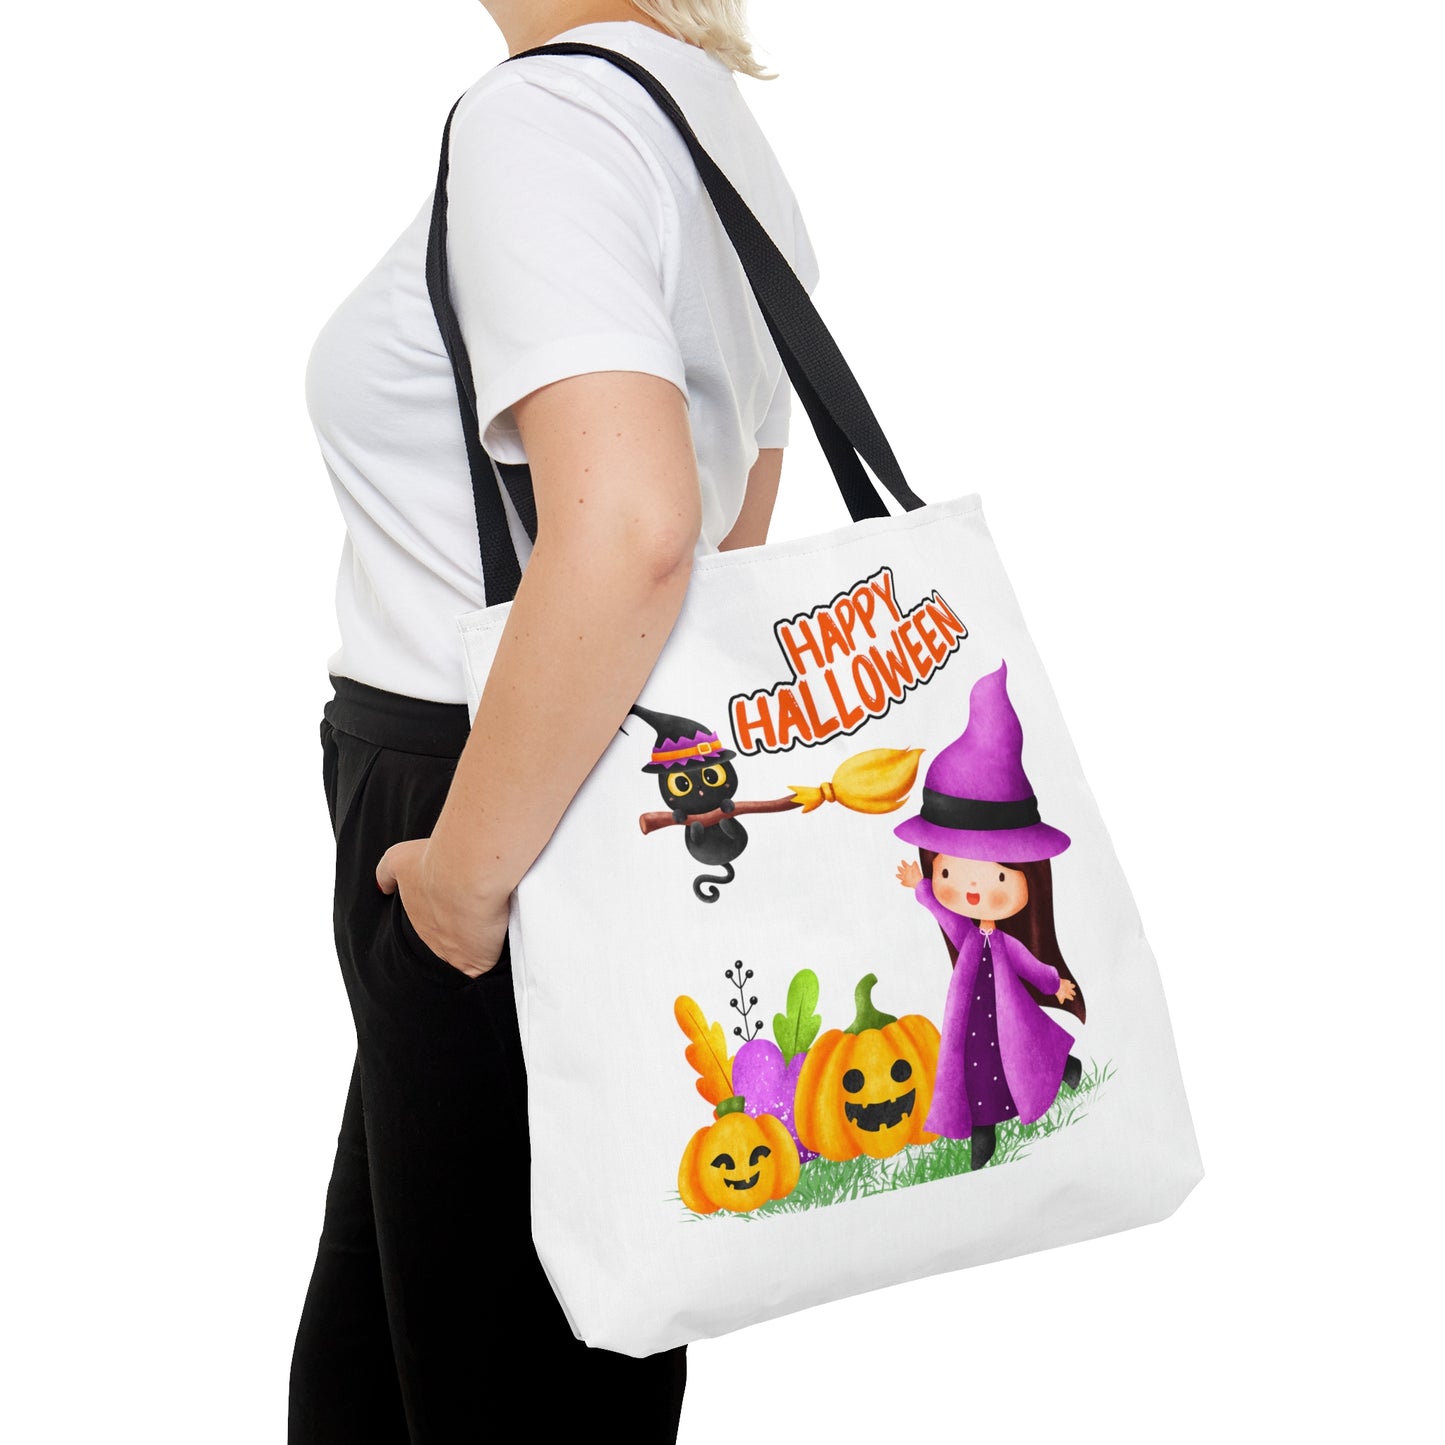 Tote Bag - Halloween - Young witch - 02